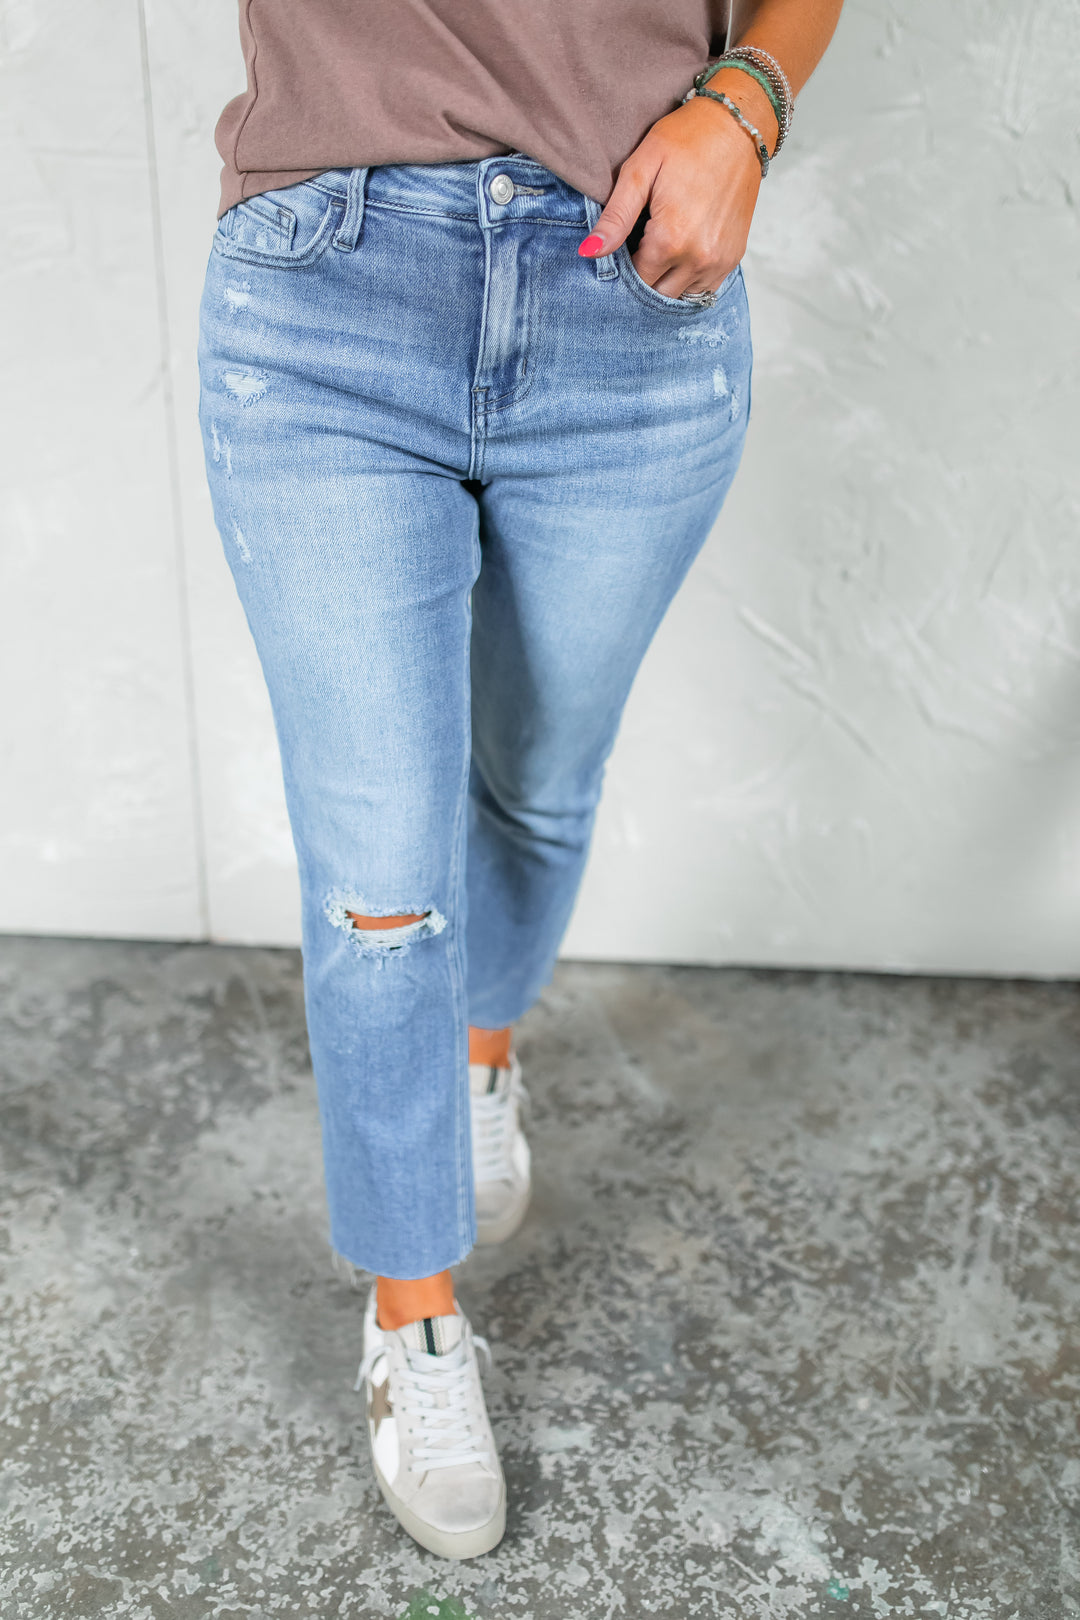 The Afternoon Bliss Straight Jeans